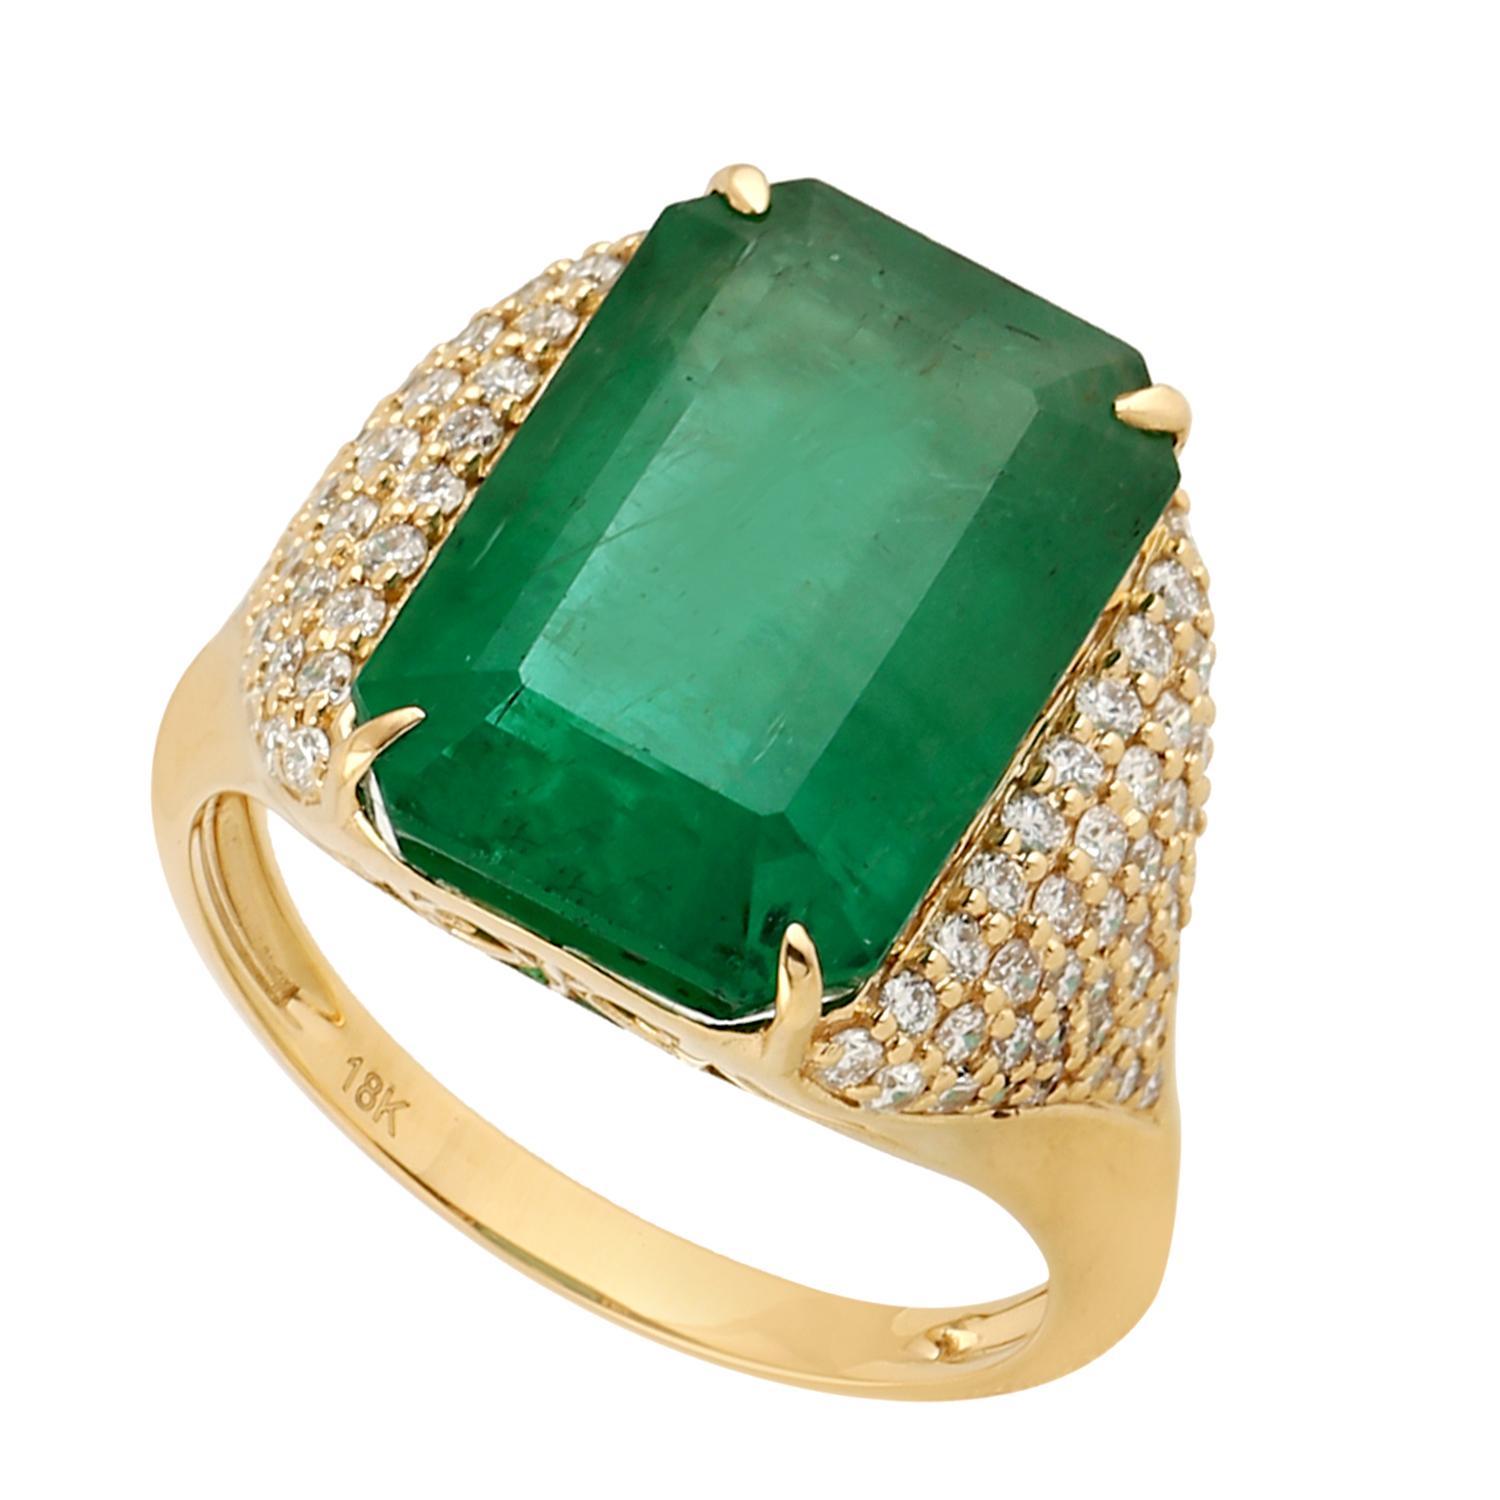 Octogen Zambian Emerald Ring with Side Pave Diamonds Made in 18k Yellow Gold In New Condition For Sale In New York, NY